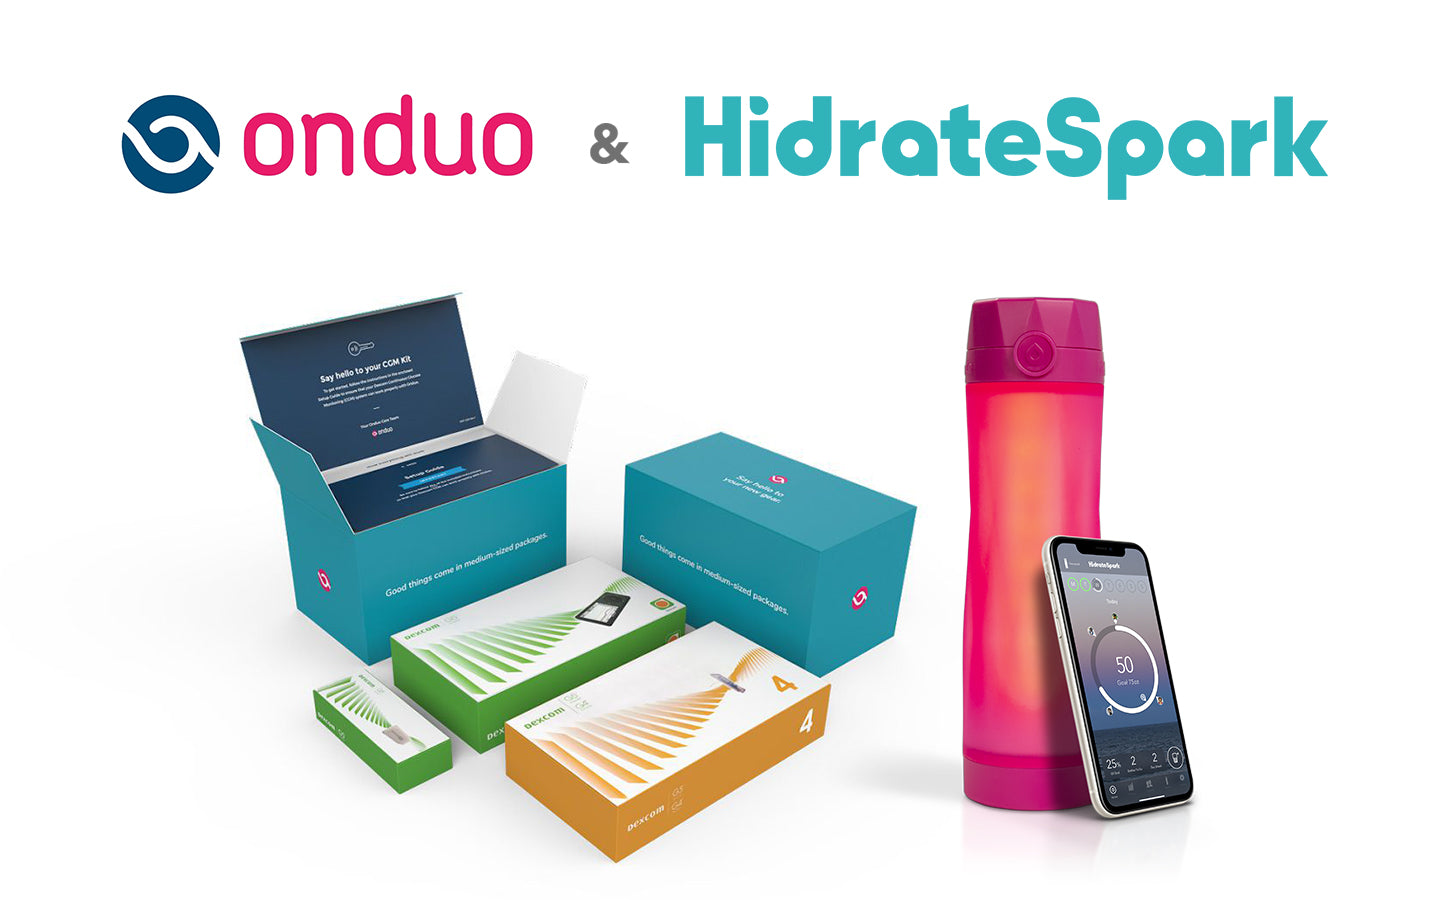 onduo's CGM system pack for type 2 diabetes along side a berry colored hidrate spark 3 bluetooth smart water bottle